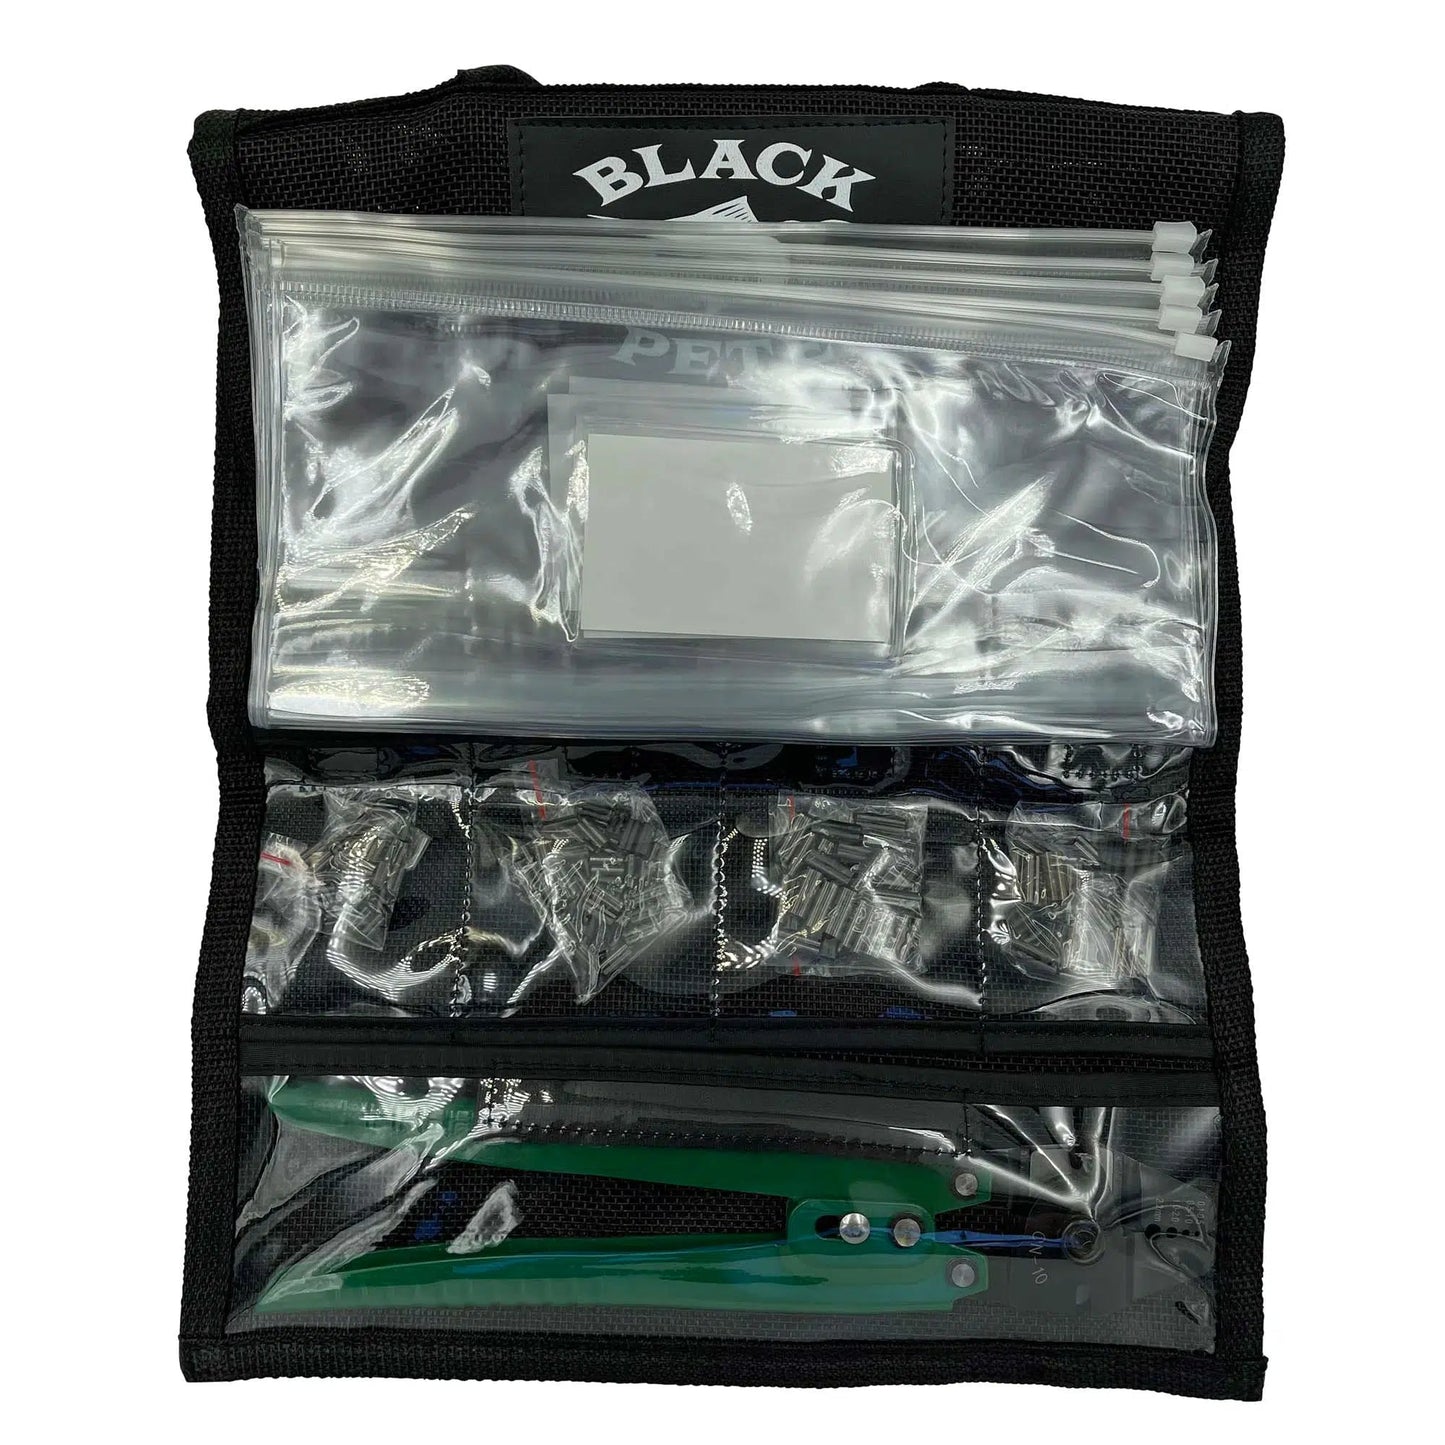 Black Pete Tournament Wire Rigging Kit-Accessories - Game Fishing-Black Pete-Fishing Station